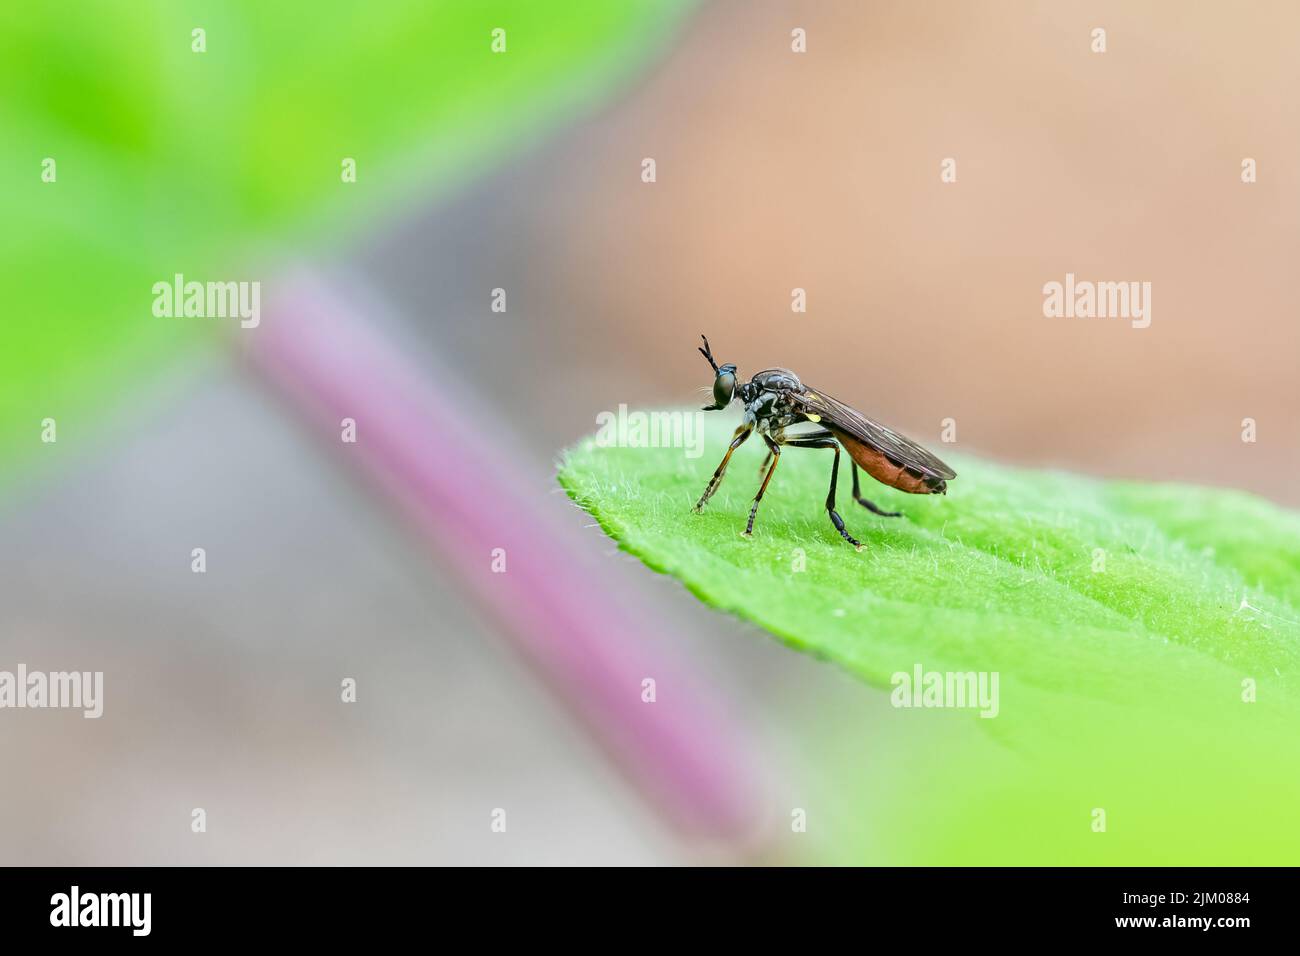 A fly, Dioctria hyalipennis, standing on a leaf in the garden Stock Photo